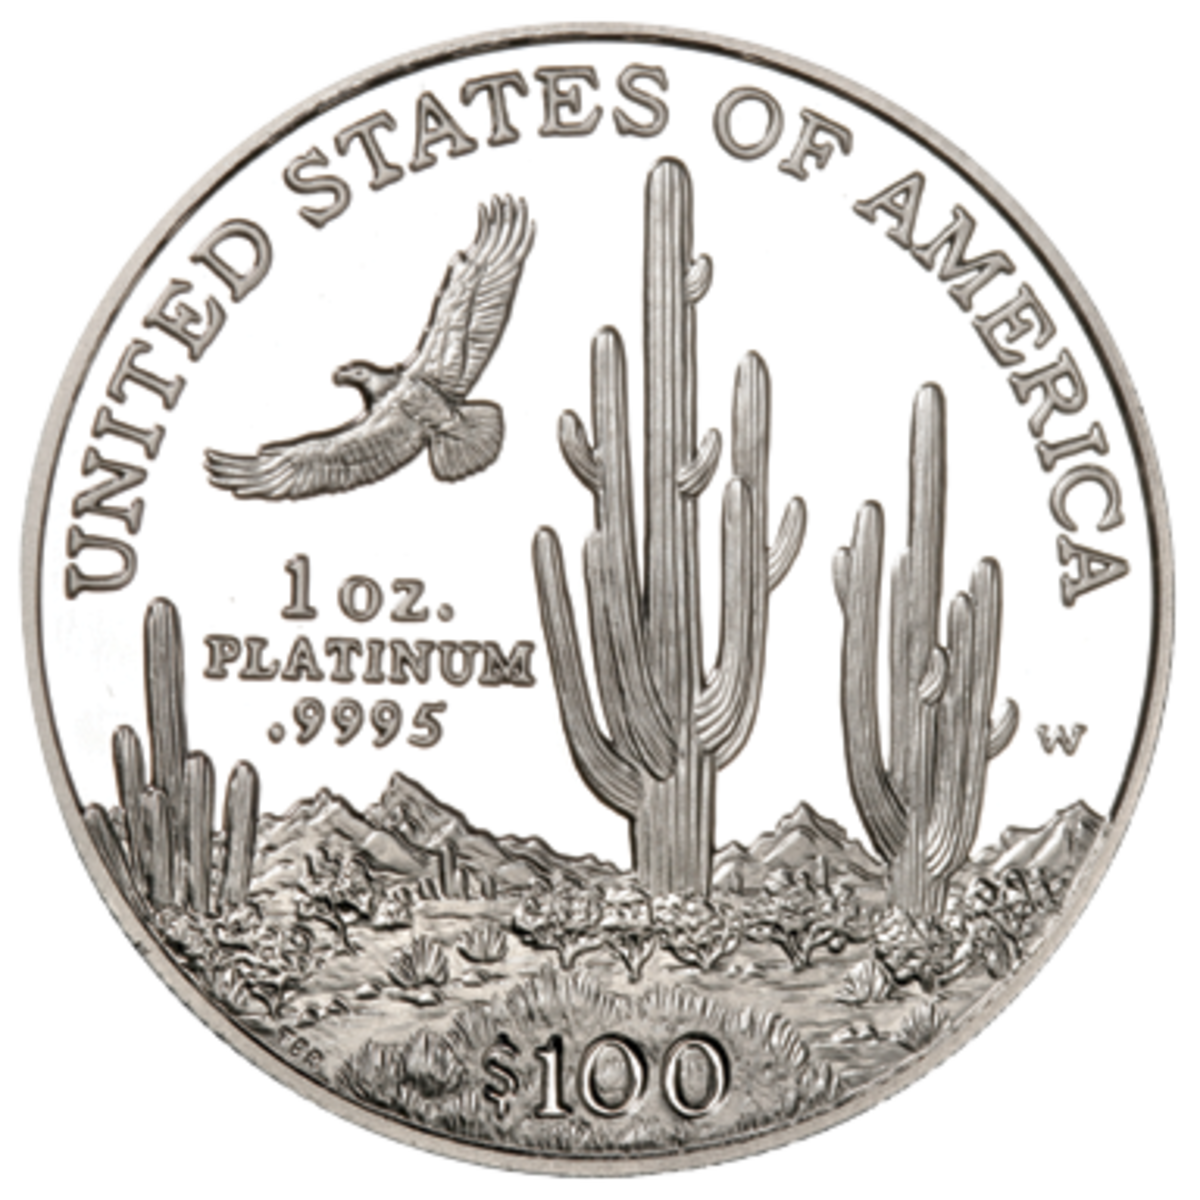 A 2001 one-ounce Eagle, with eagle in flight over Southwestern Cactus Desert. (Image courtesy of Numismaster.com)